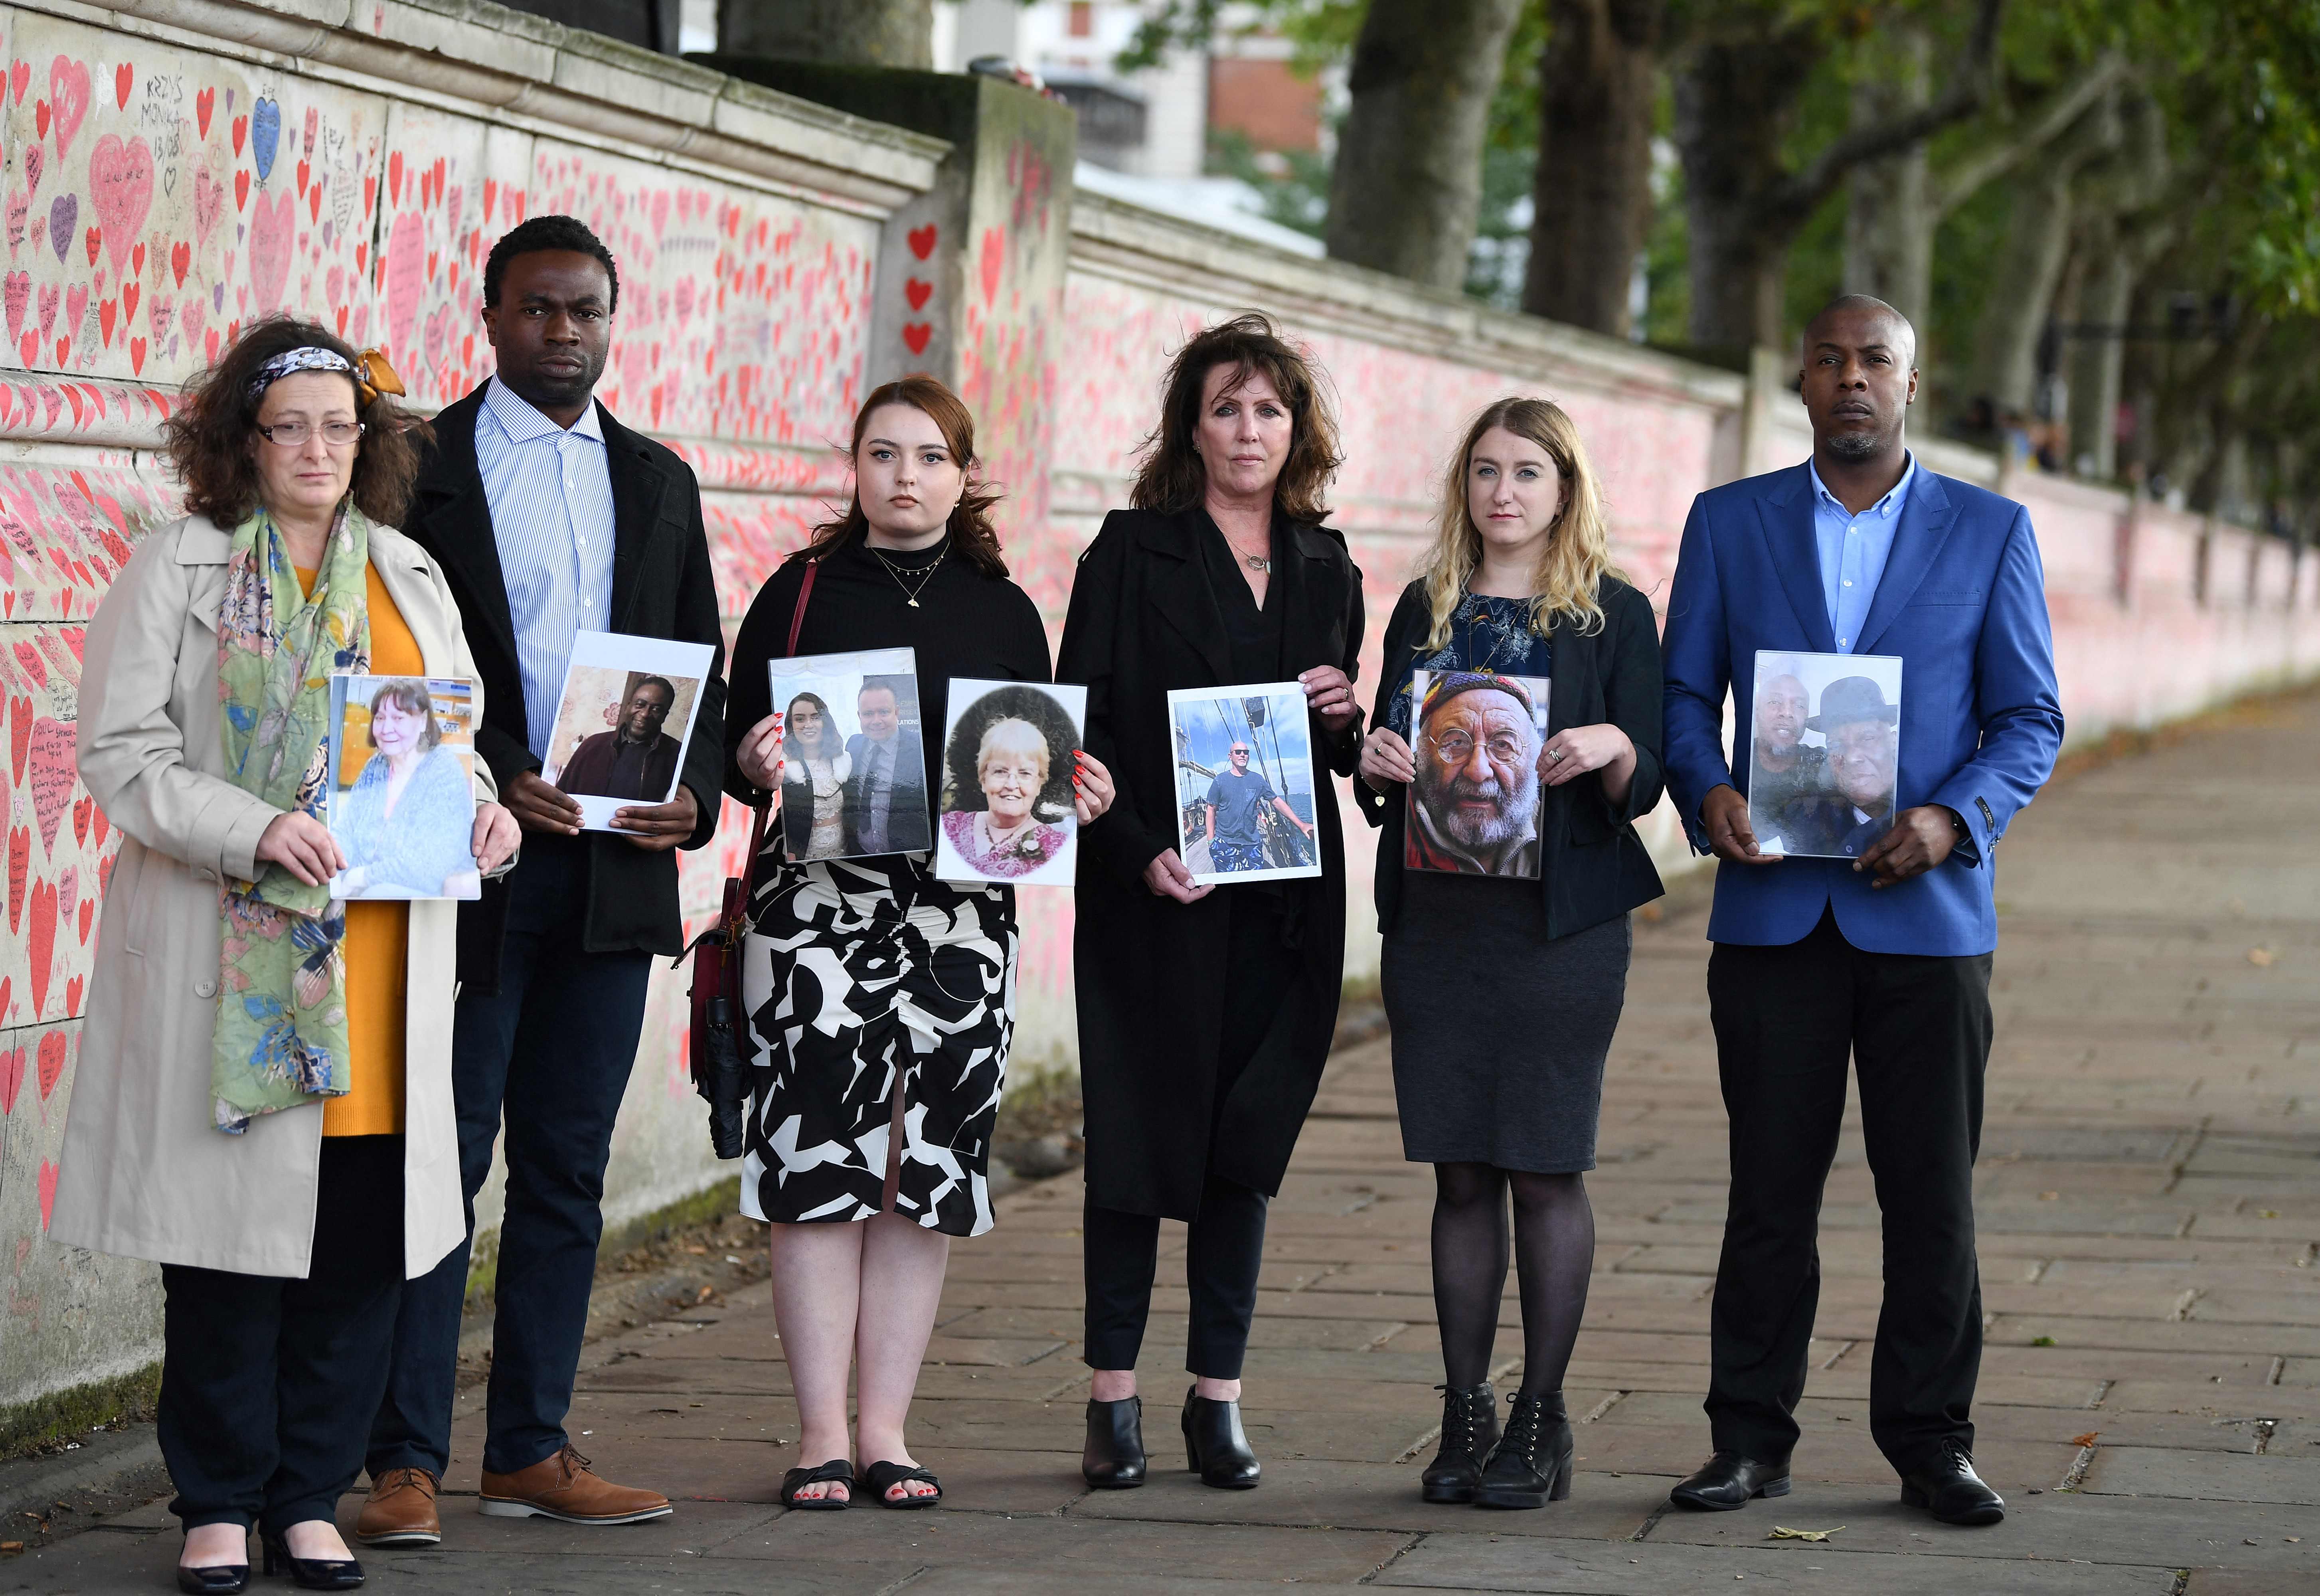 Members of the Covid-19 Bereaved Families for Justice group, from left, Deborah Doyle, Lobby Akinnola, Hannah Brady, Fran Hall, Jo Goodman and Charlie Williams, hold photos of loved ones who died of coronavirus